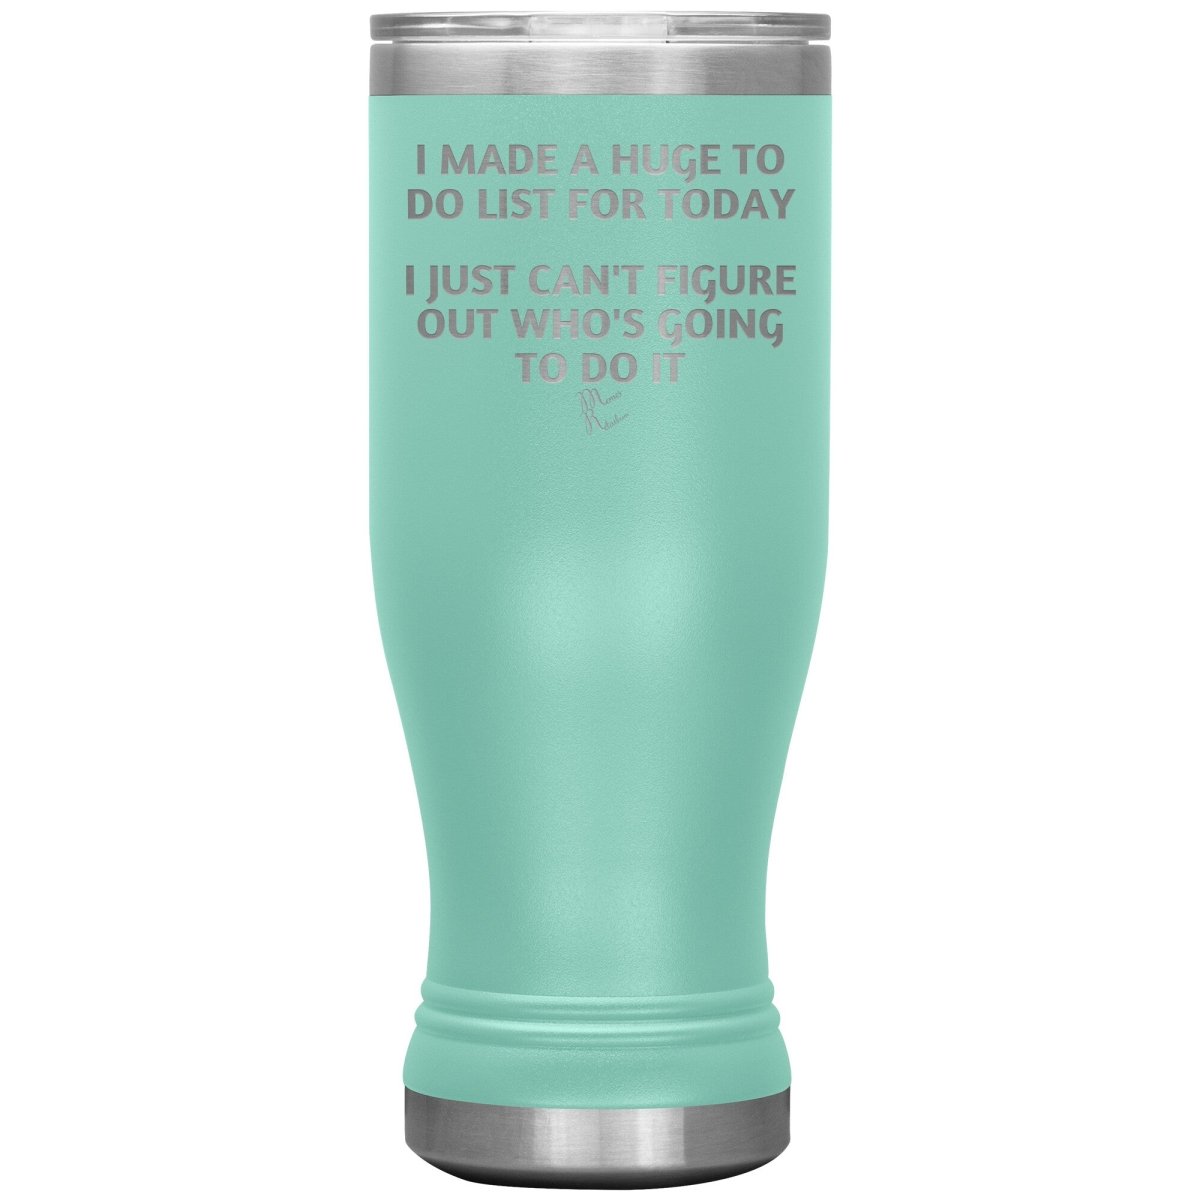 I made a huge to do list for today. I just can't figure out who's going to do it Tumblers, 20oz BOHO Insulated Tumbler / Teal - MemesRetail.com